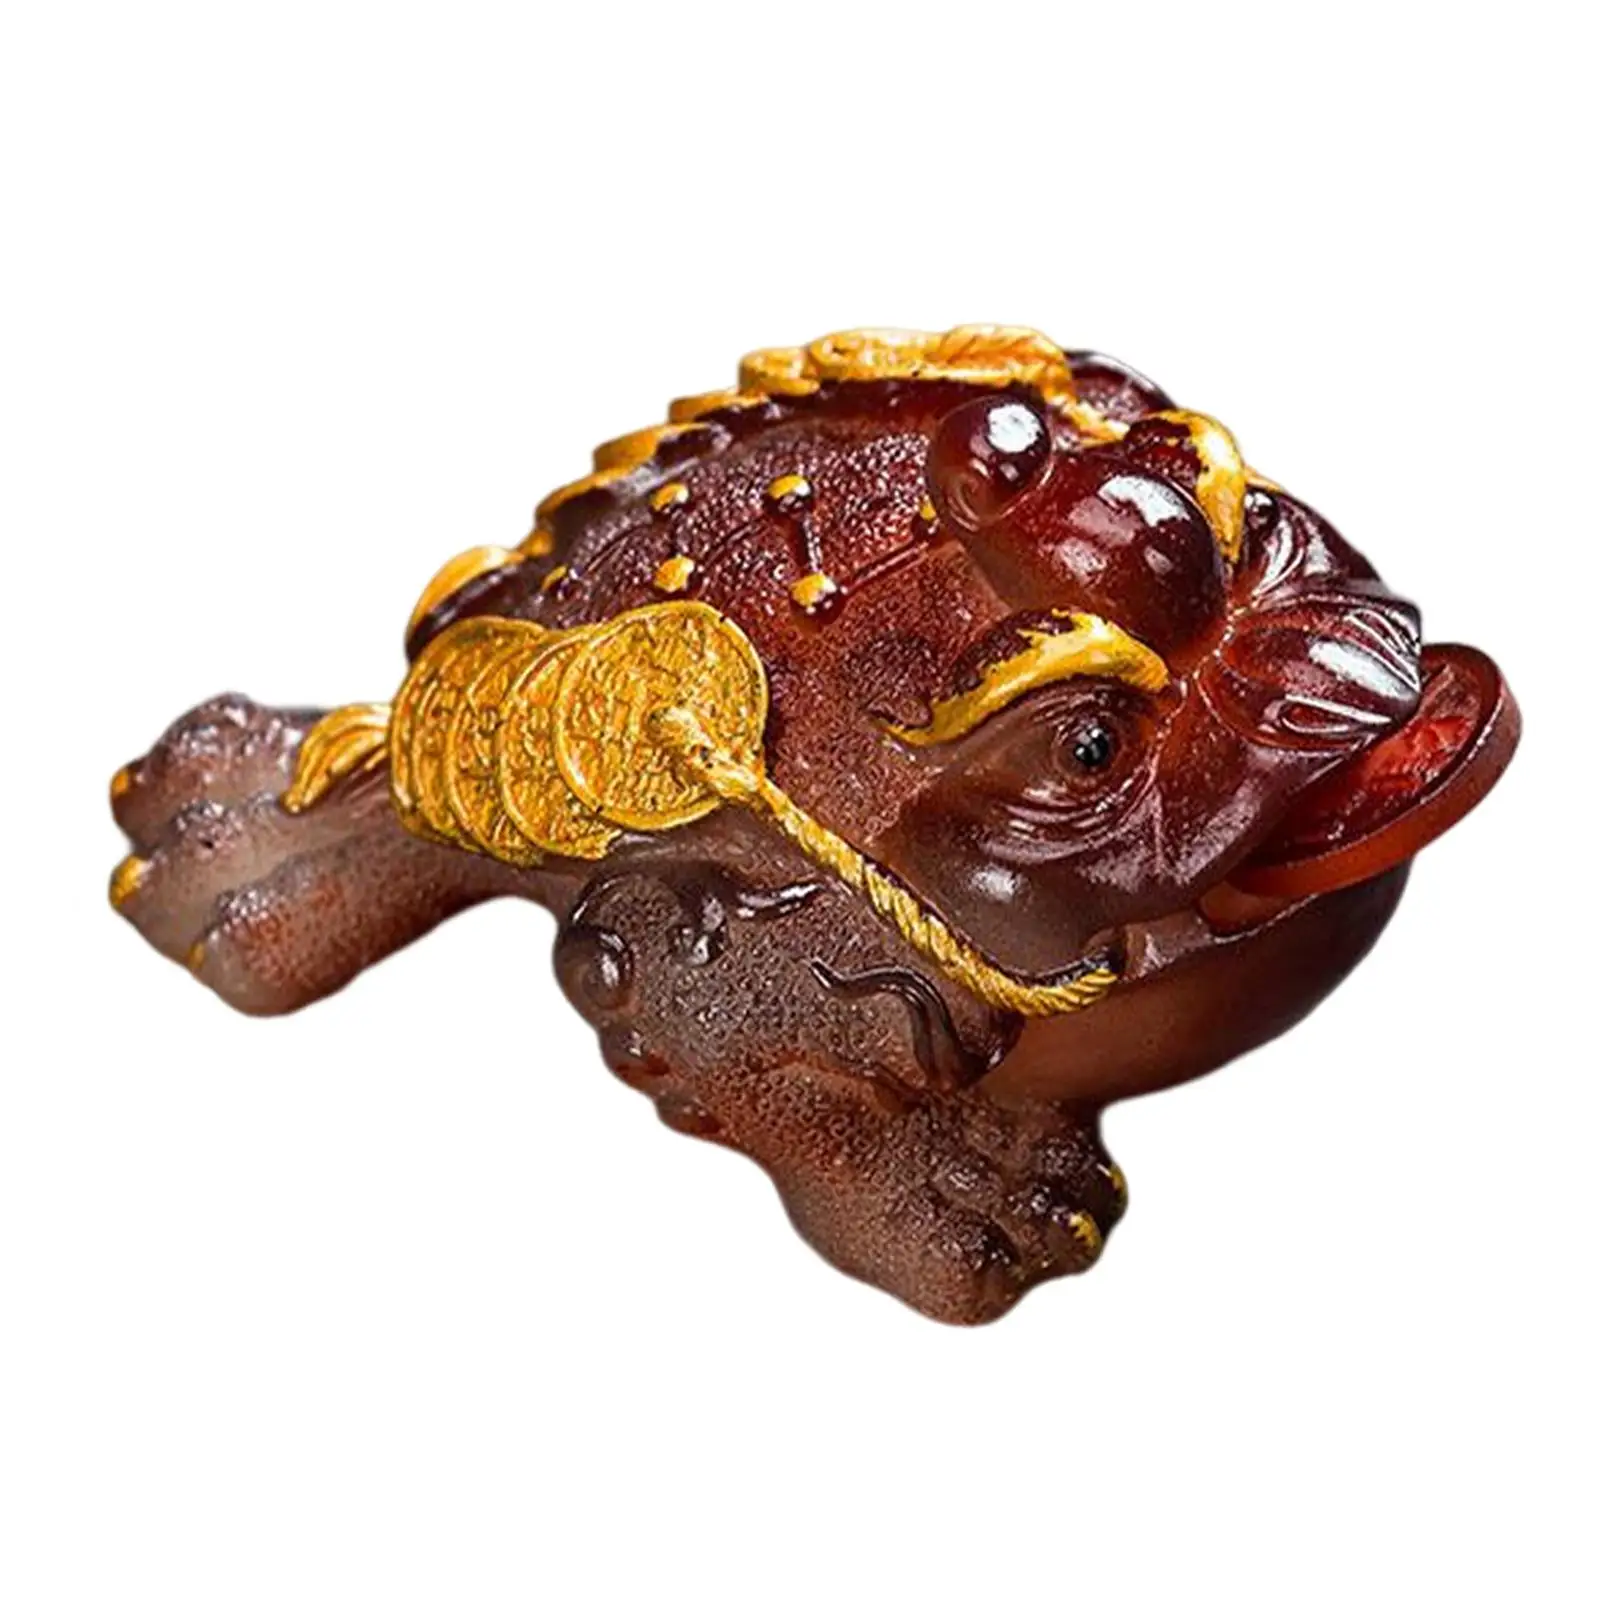 Tea Pet Ornament Resin Crafts Kungfu Color Changing Toad Figurine for Tea Table Tea Tray Tea Accessories Decoration